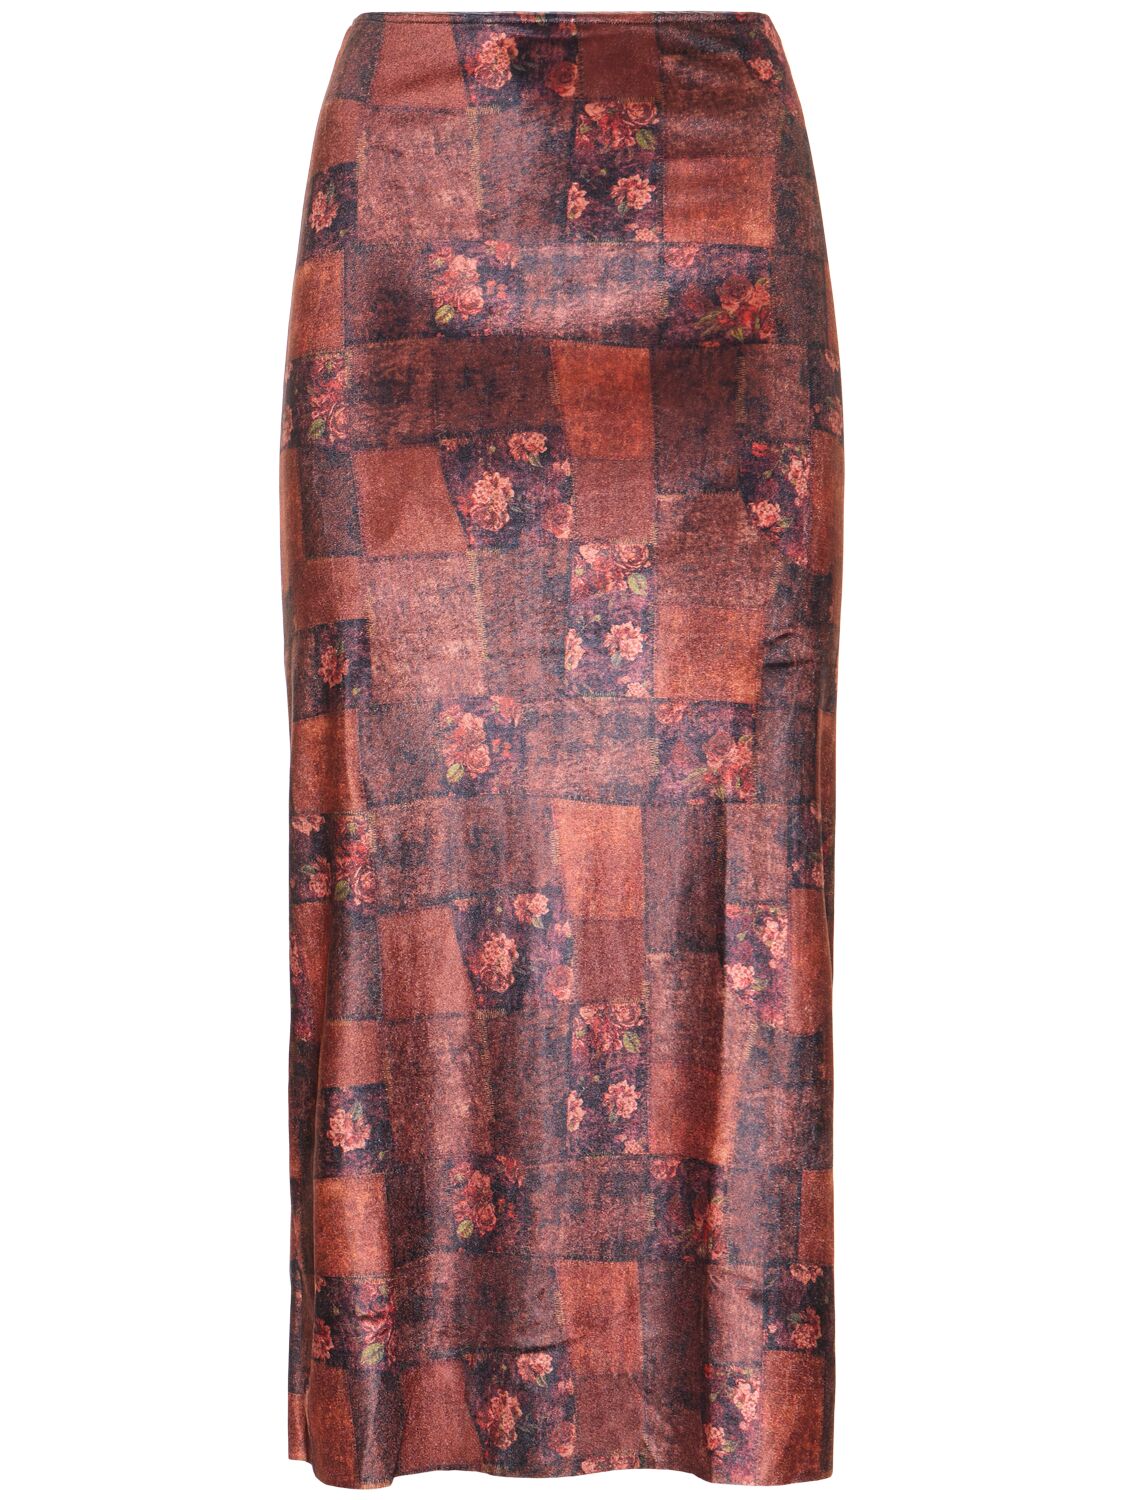 Printed Stretch Jersey Maxi Skirt